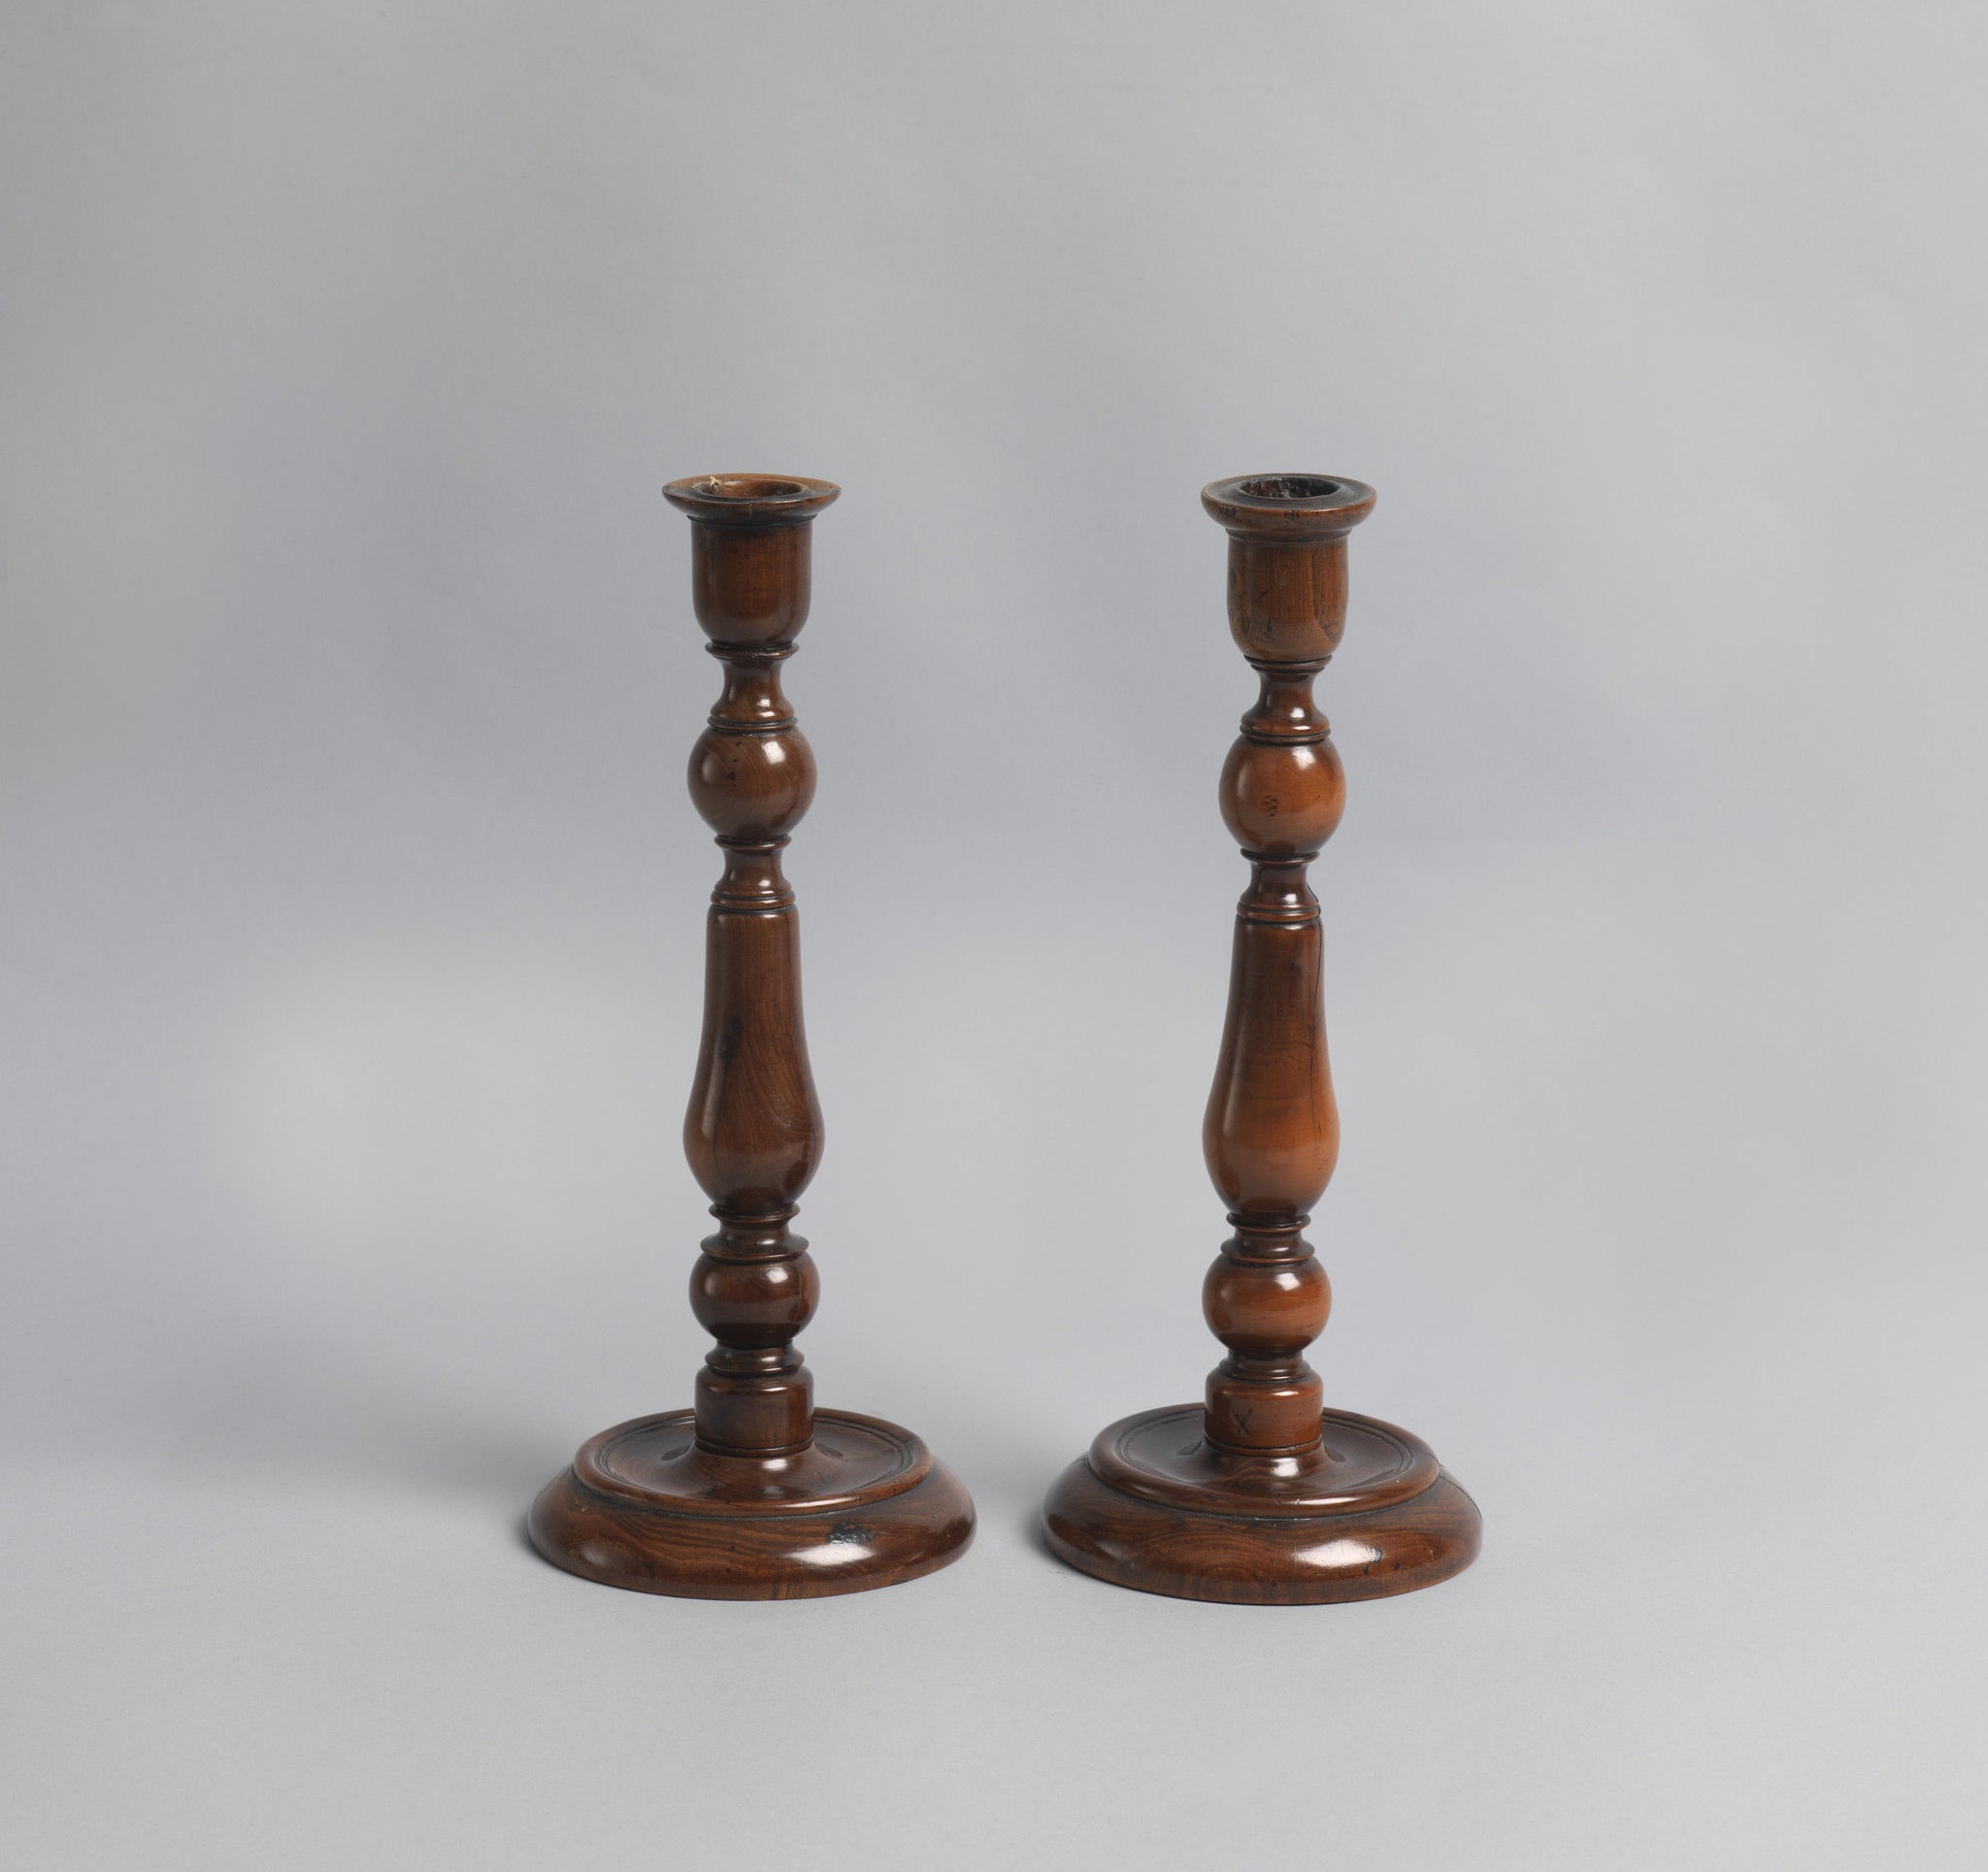 A Pair of Early Yew Wood Table Candlesticks